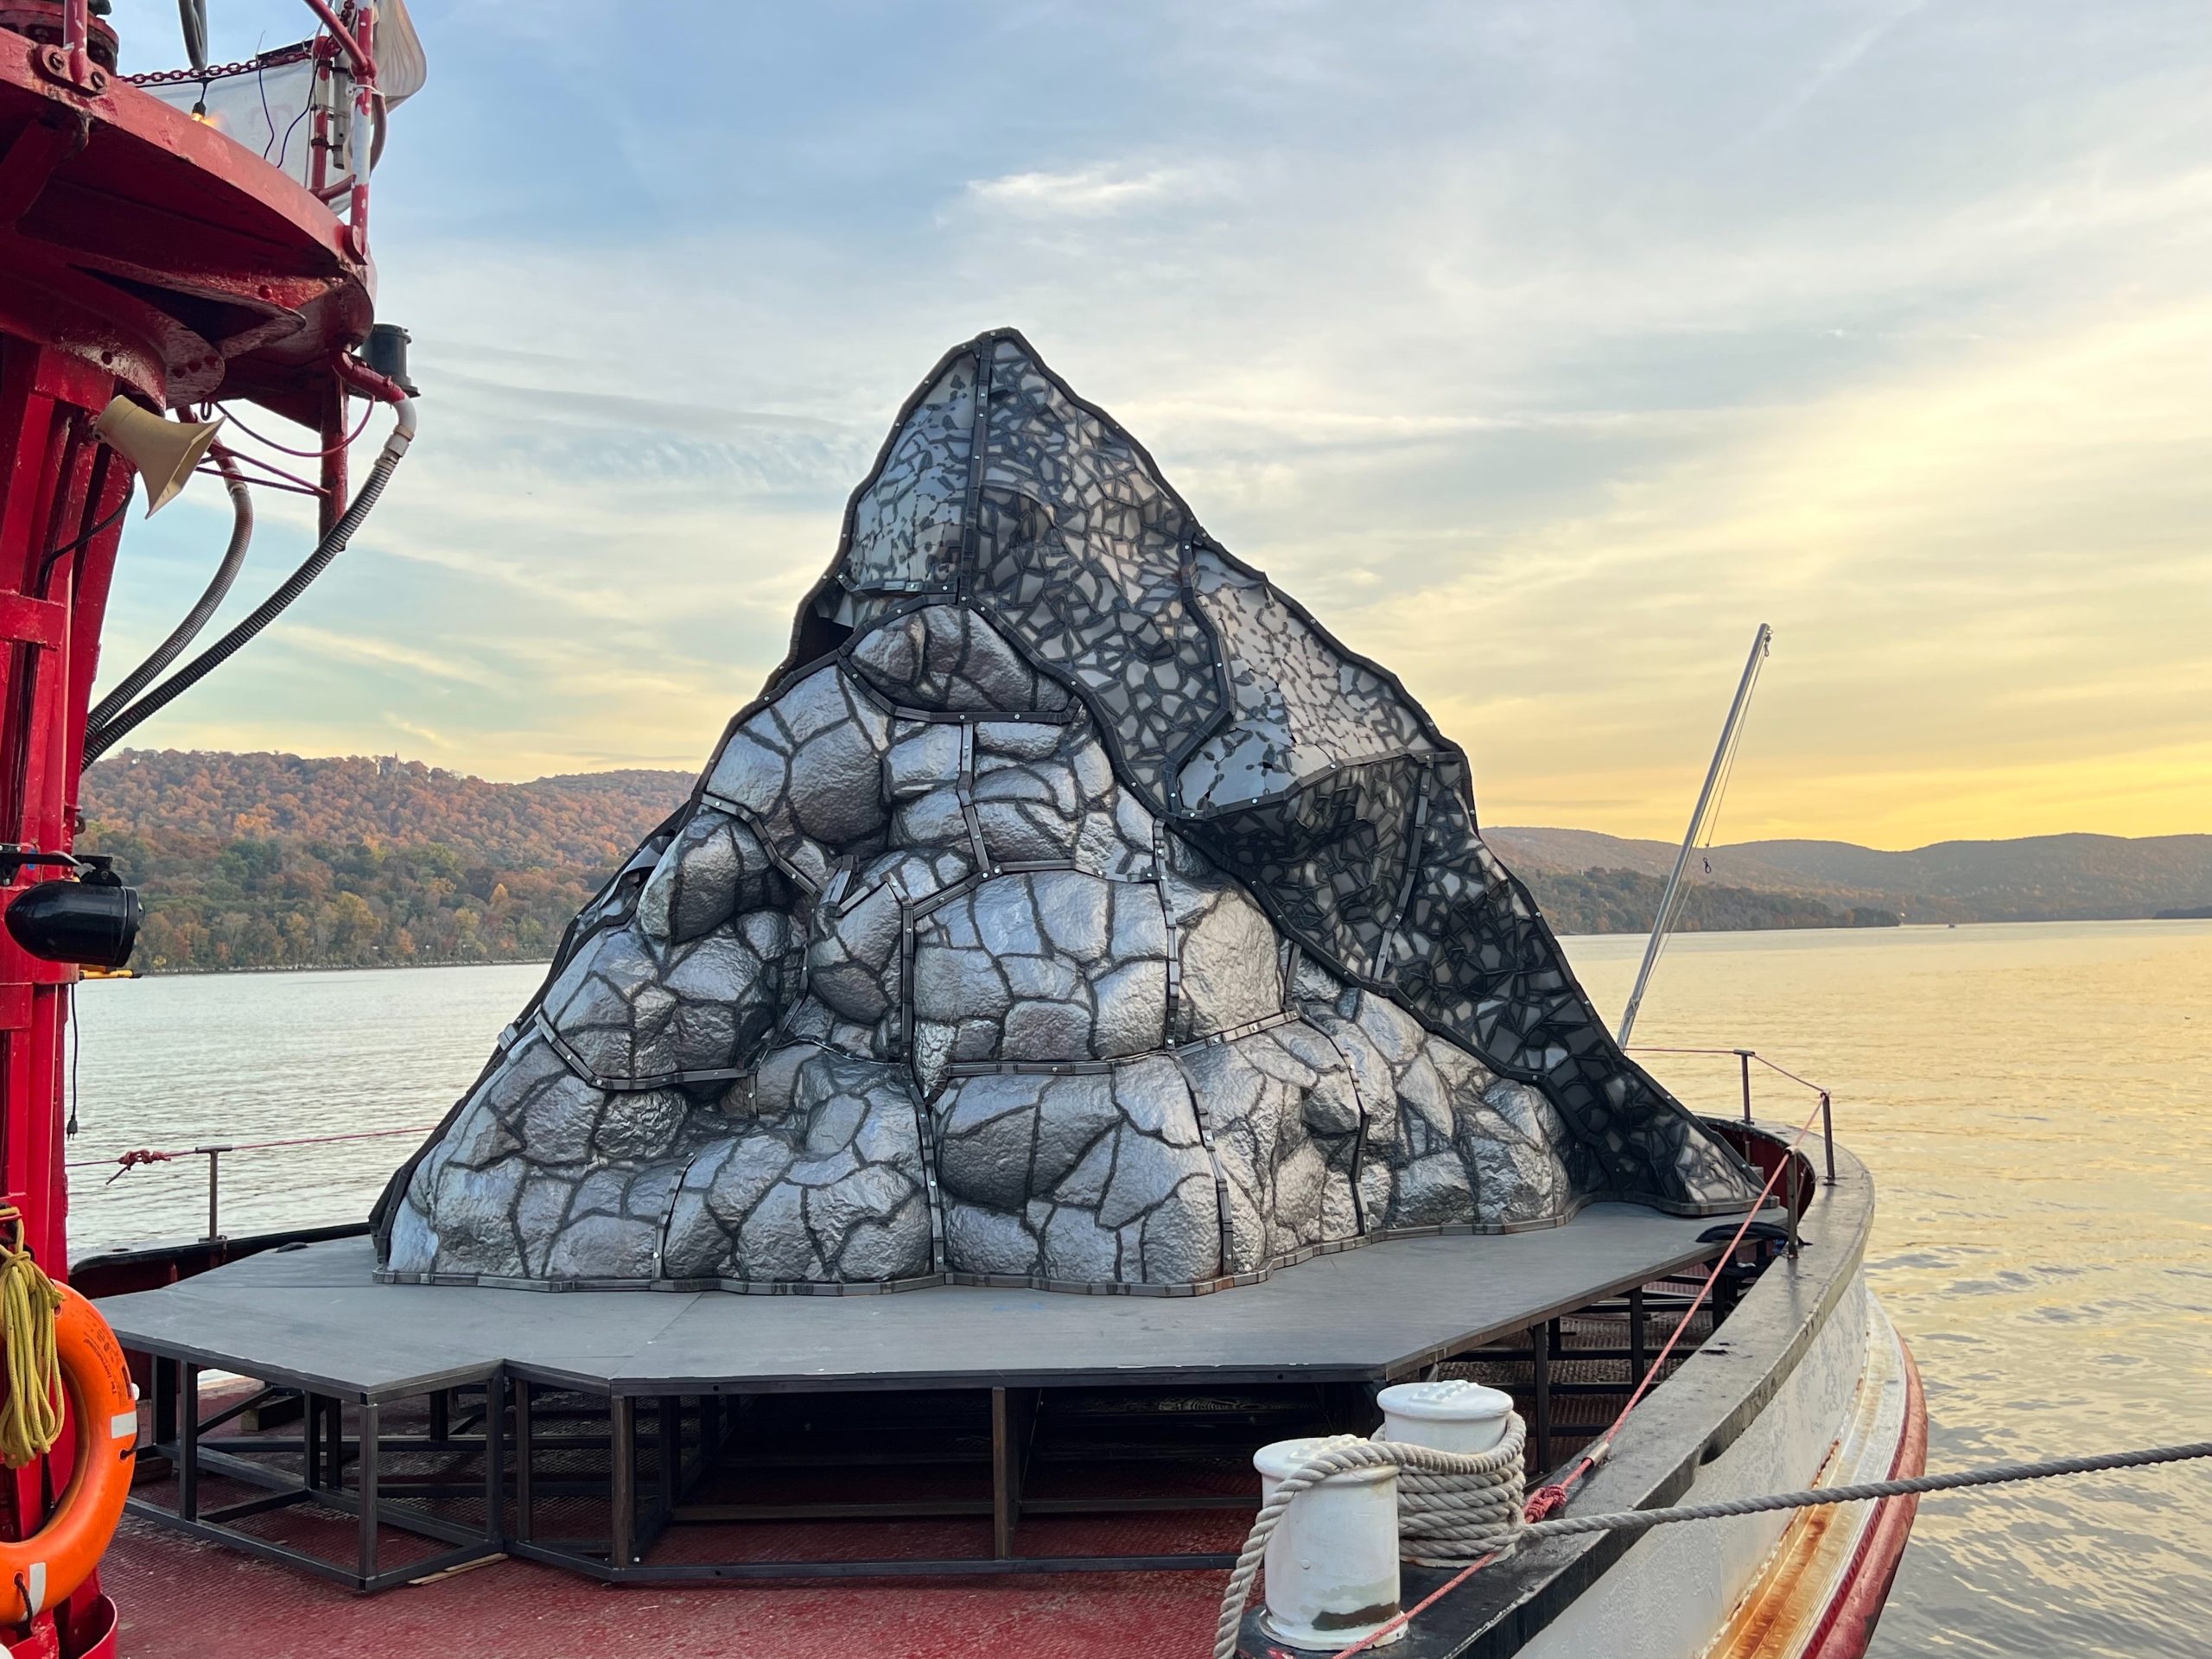 Beatriz Cortez, Ilopango, the Volcano that Lef, photograph of the steel sculpture navigating the Hudson River on the J. J. Harvey fireboat, October 27-29, 2023, courtesy of the artist